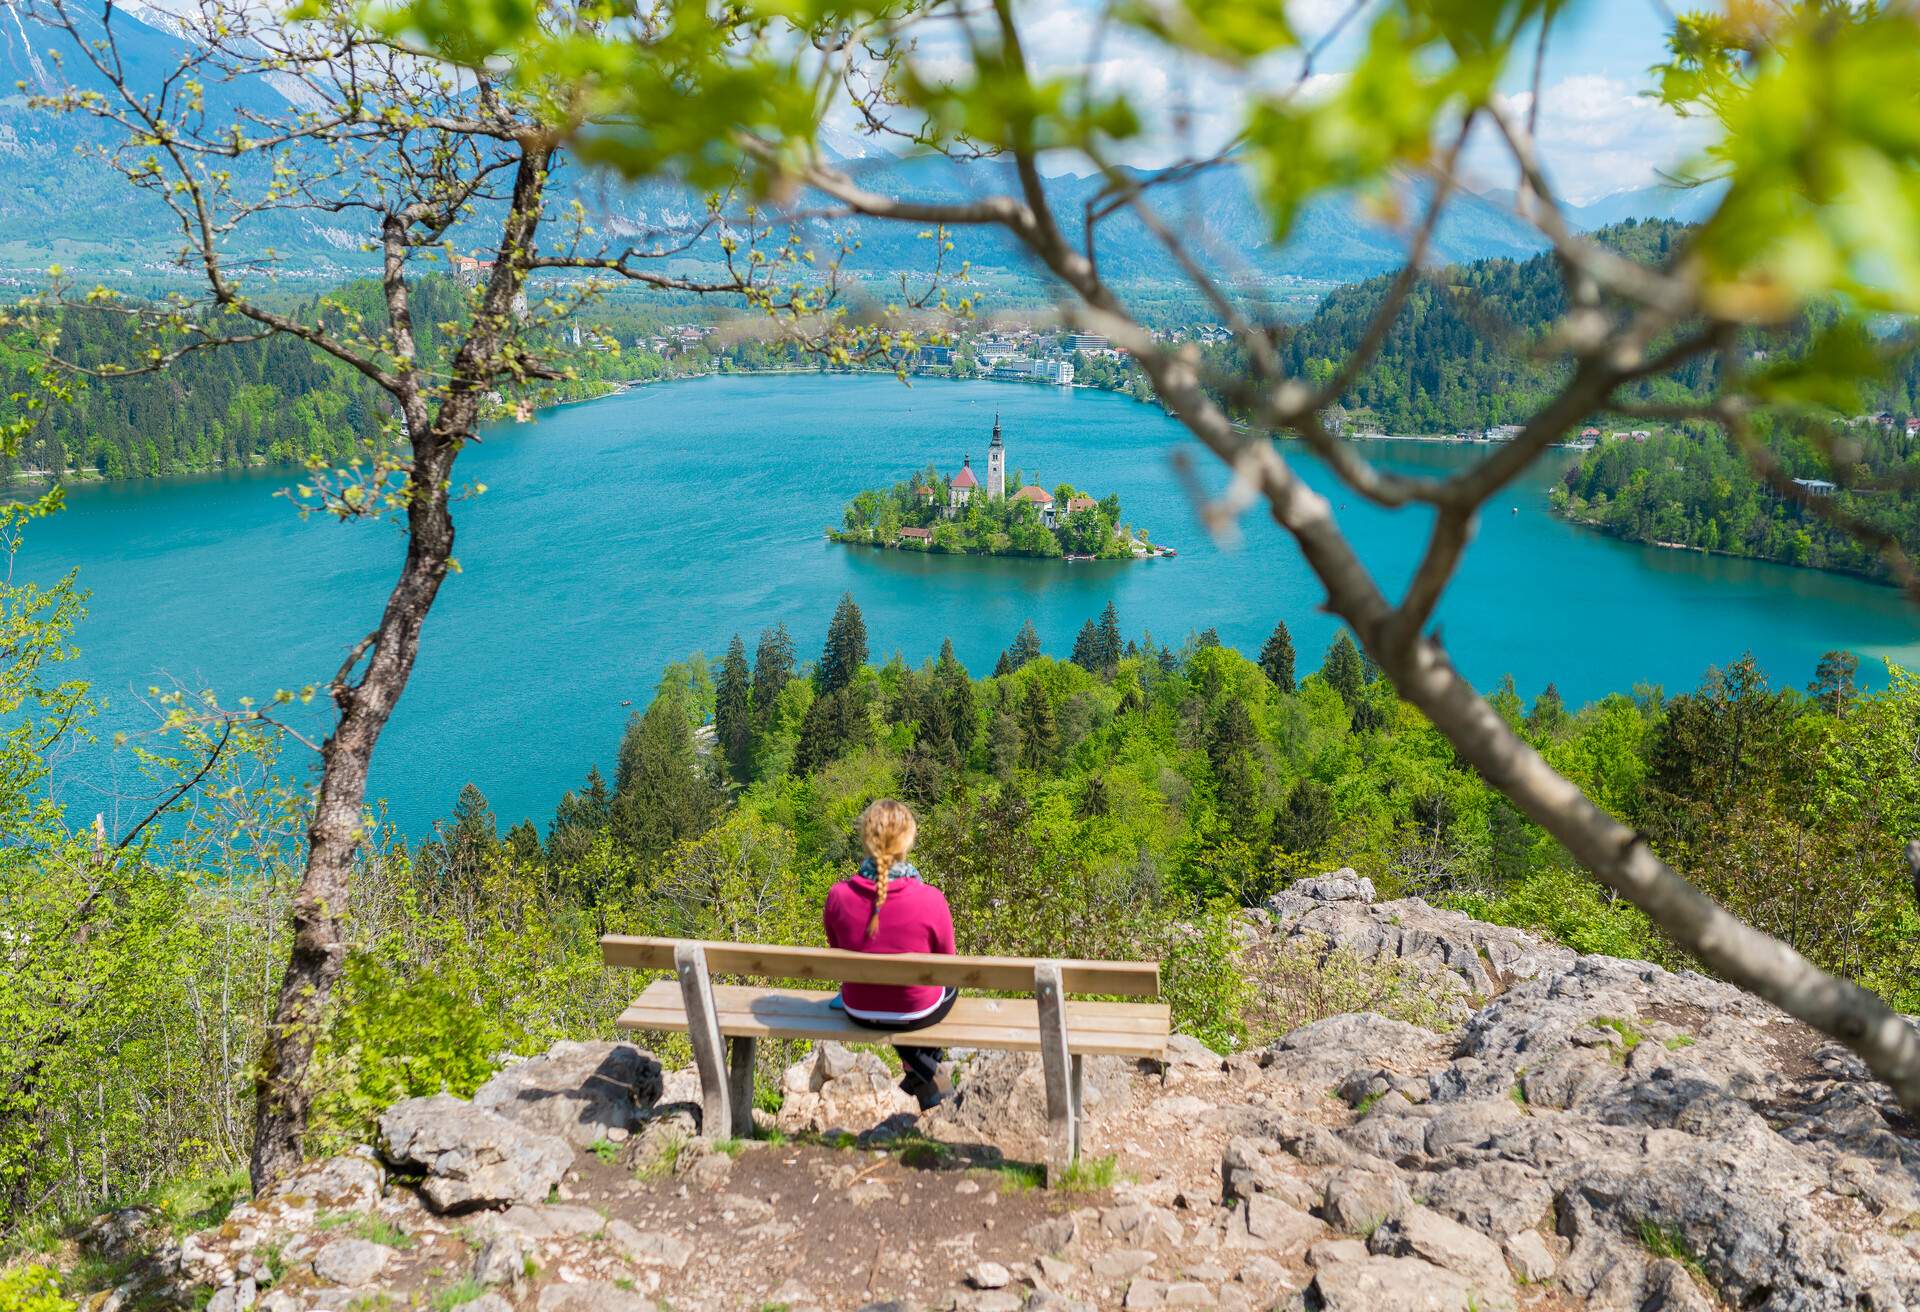 A person sits on a hilltop bench and looks at the church island in the middle of a lake.